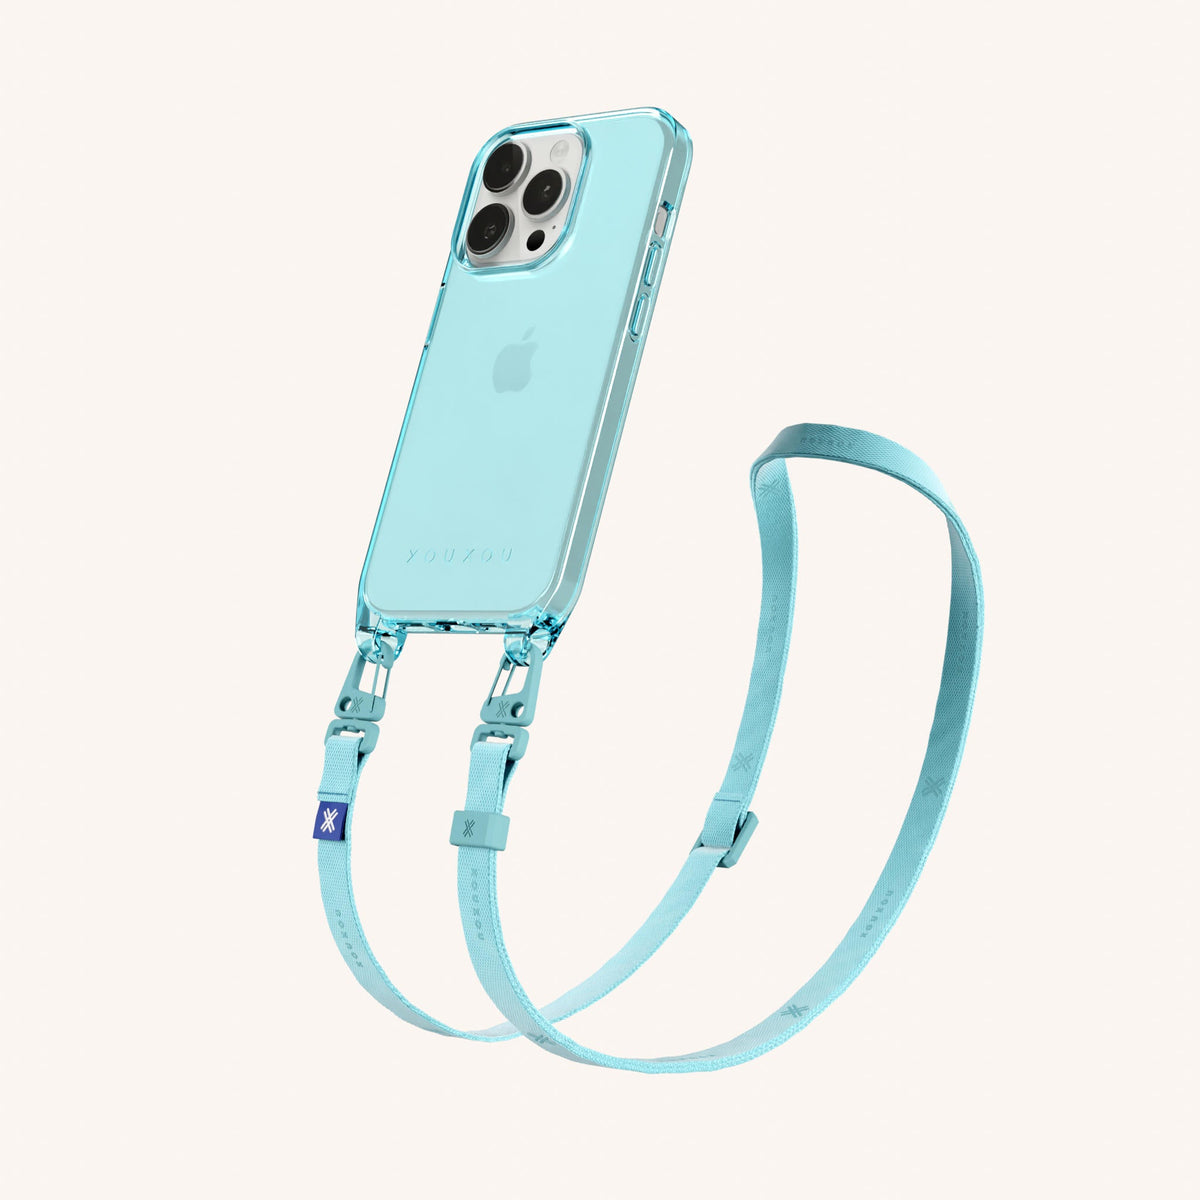 Phone Necklace with Slim Lanyard for iPhone 15 Pro without MagSafe in Pool Clear Perspective View | XOUXOU #phone model_iphone 15 pro